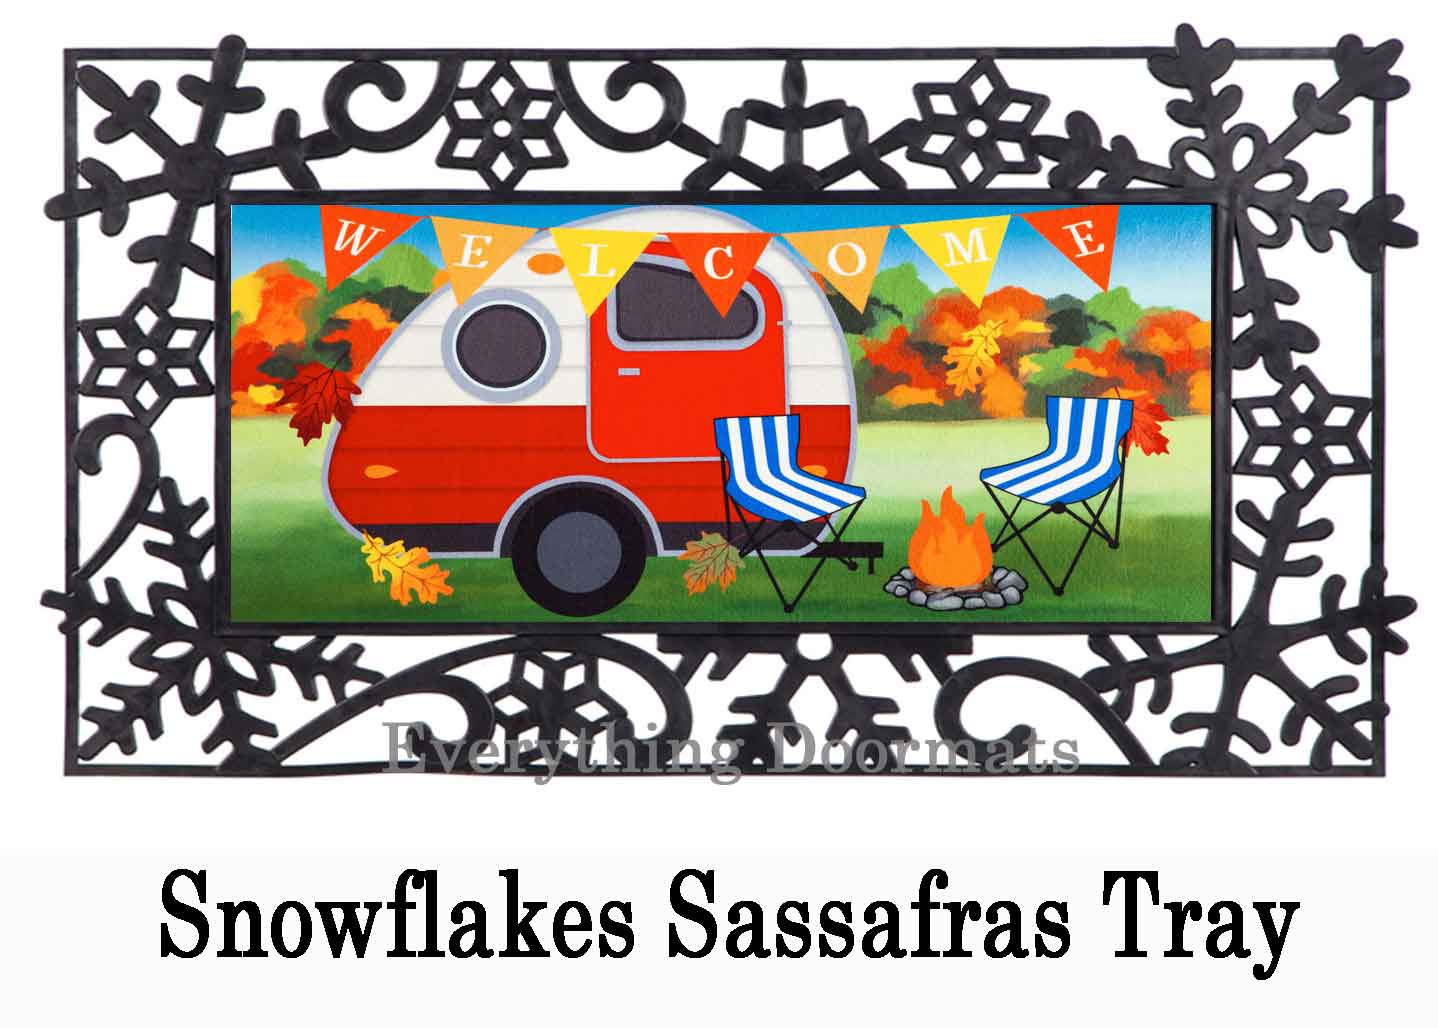 https://www.everythingdoormats.com/images/products/fall-camper-welcome-sassafras-switch-insert-doormat-in-snowflake-tray.jpg